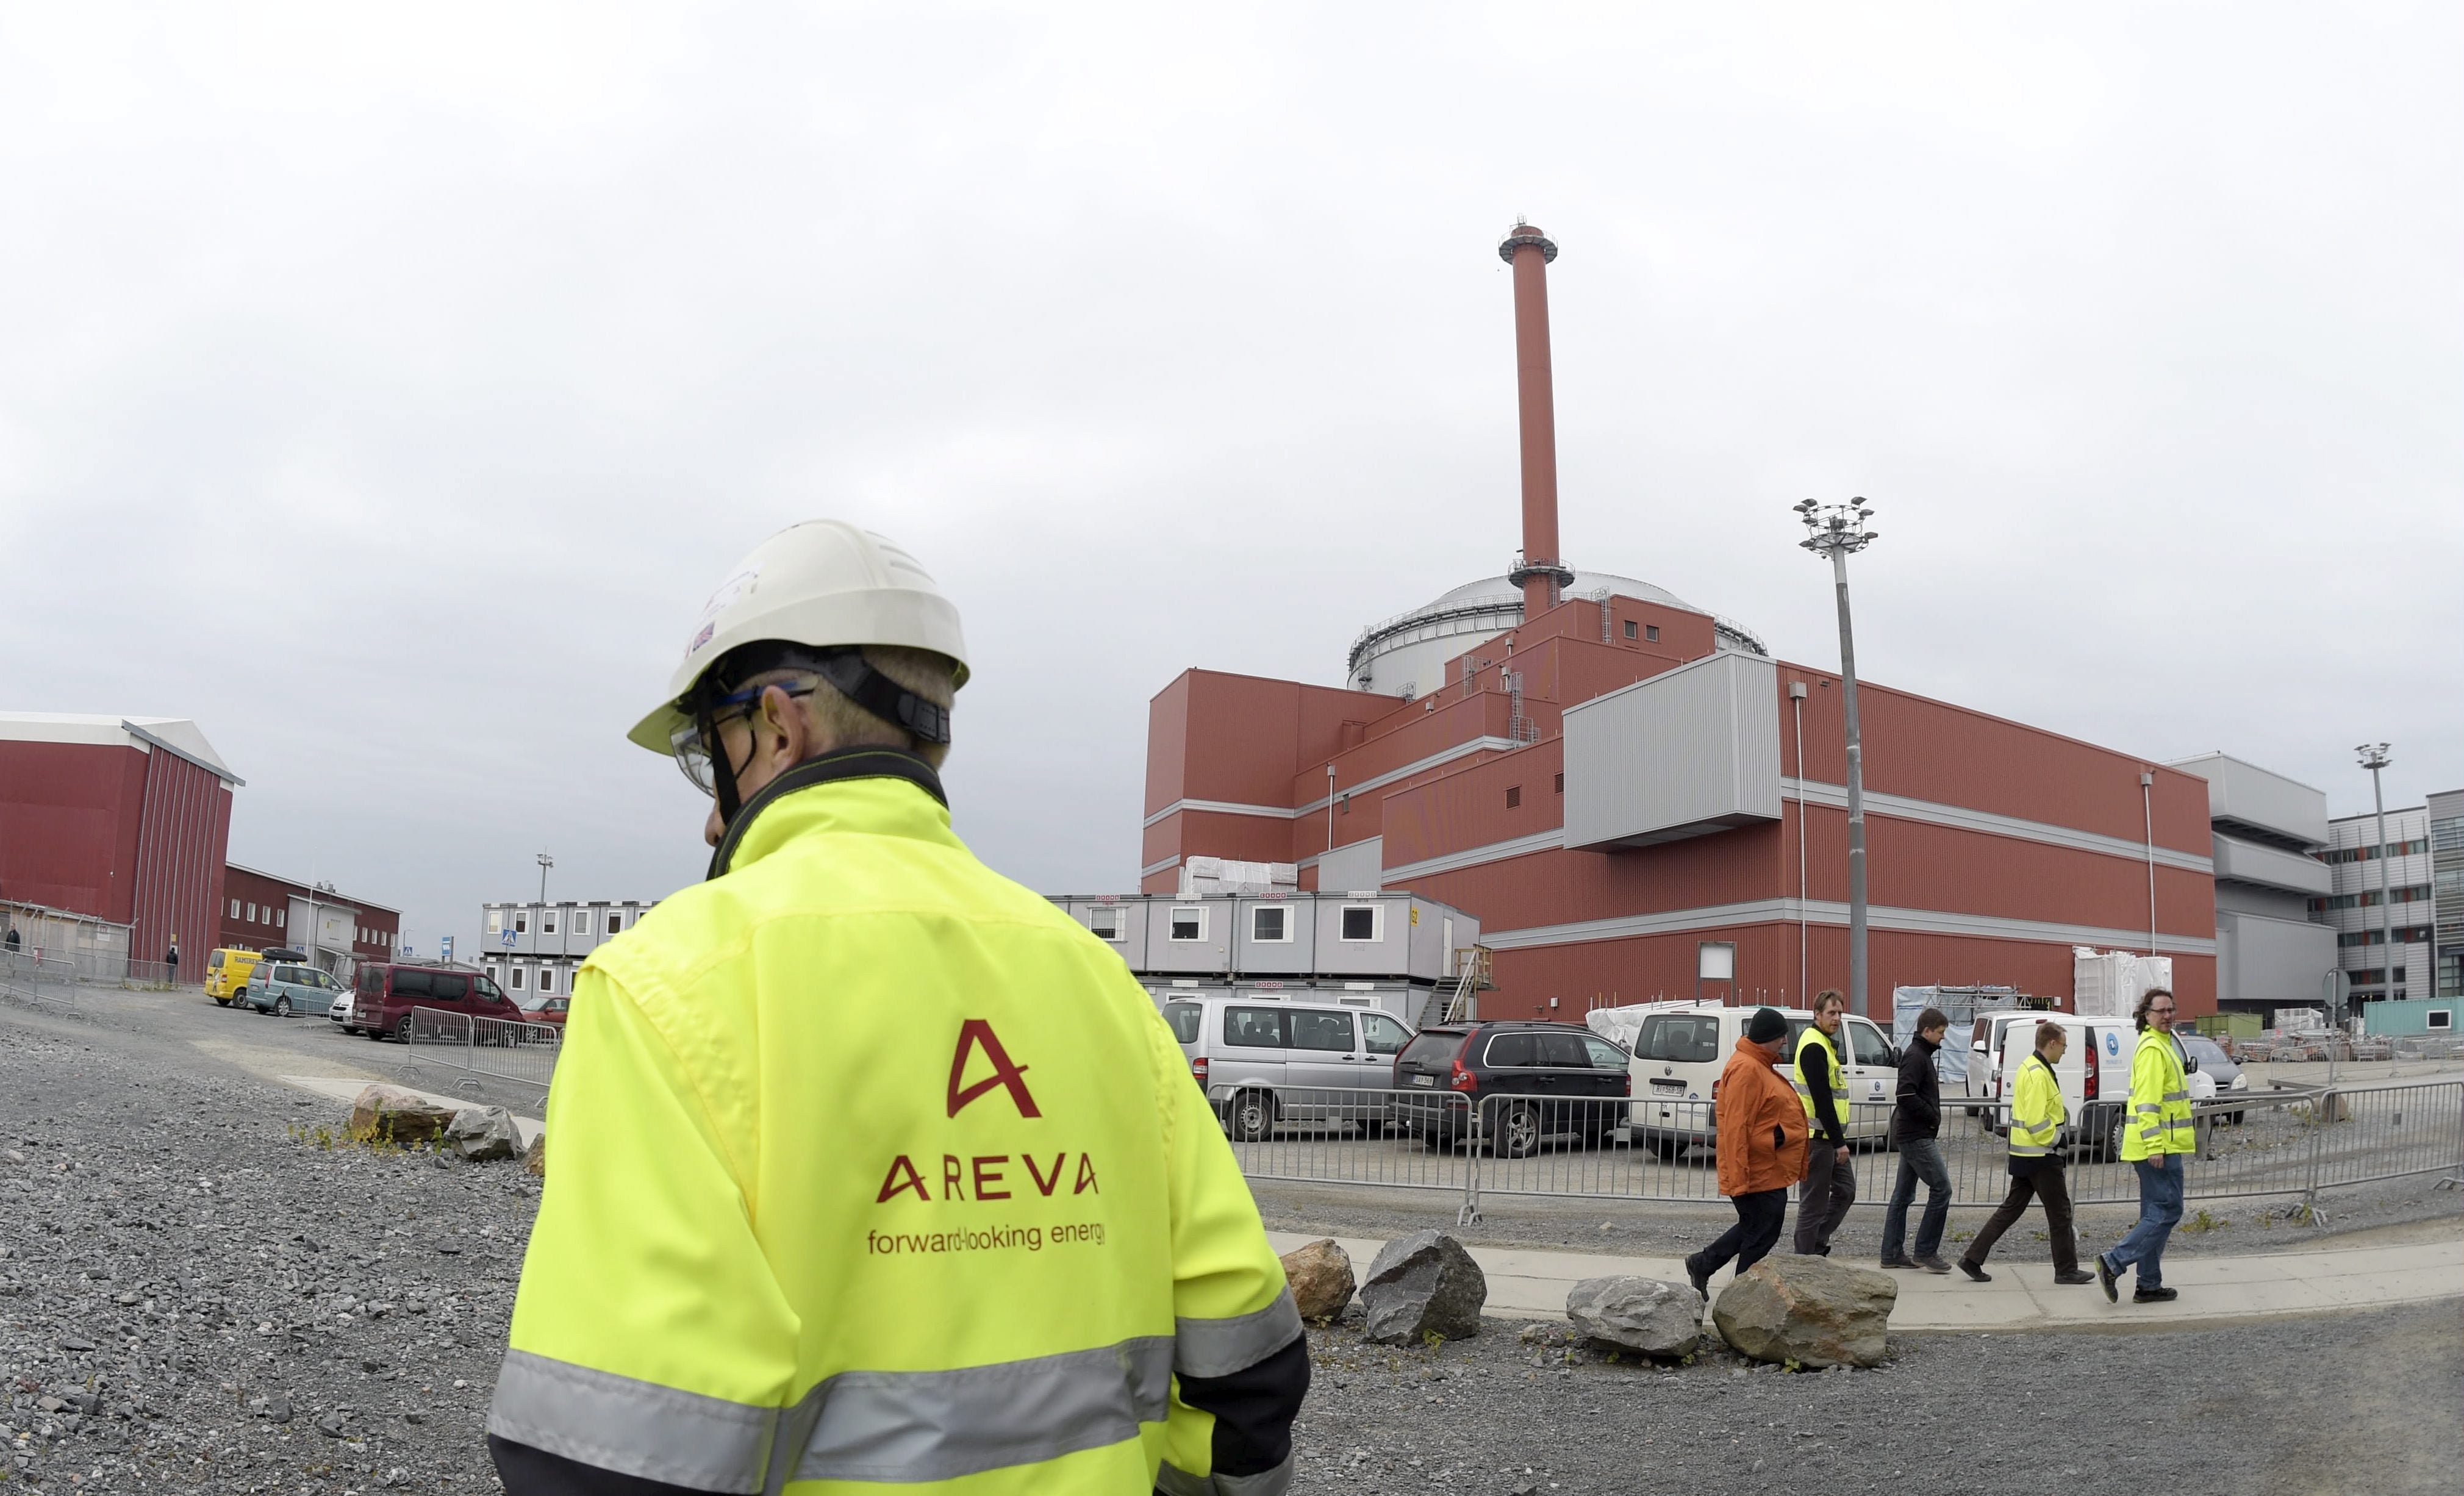 An outage at Olkiluoto nuclear power plant triggered the decision.